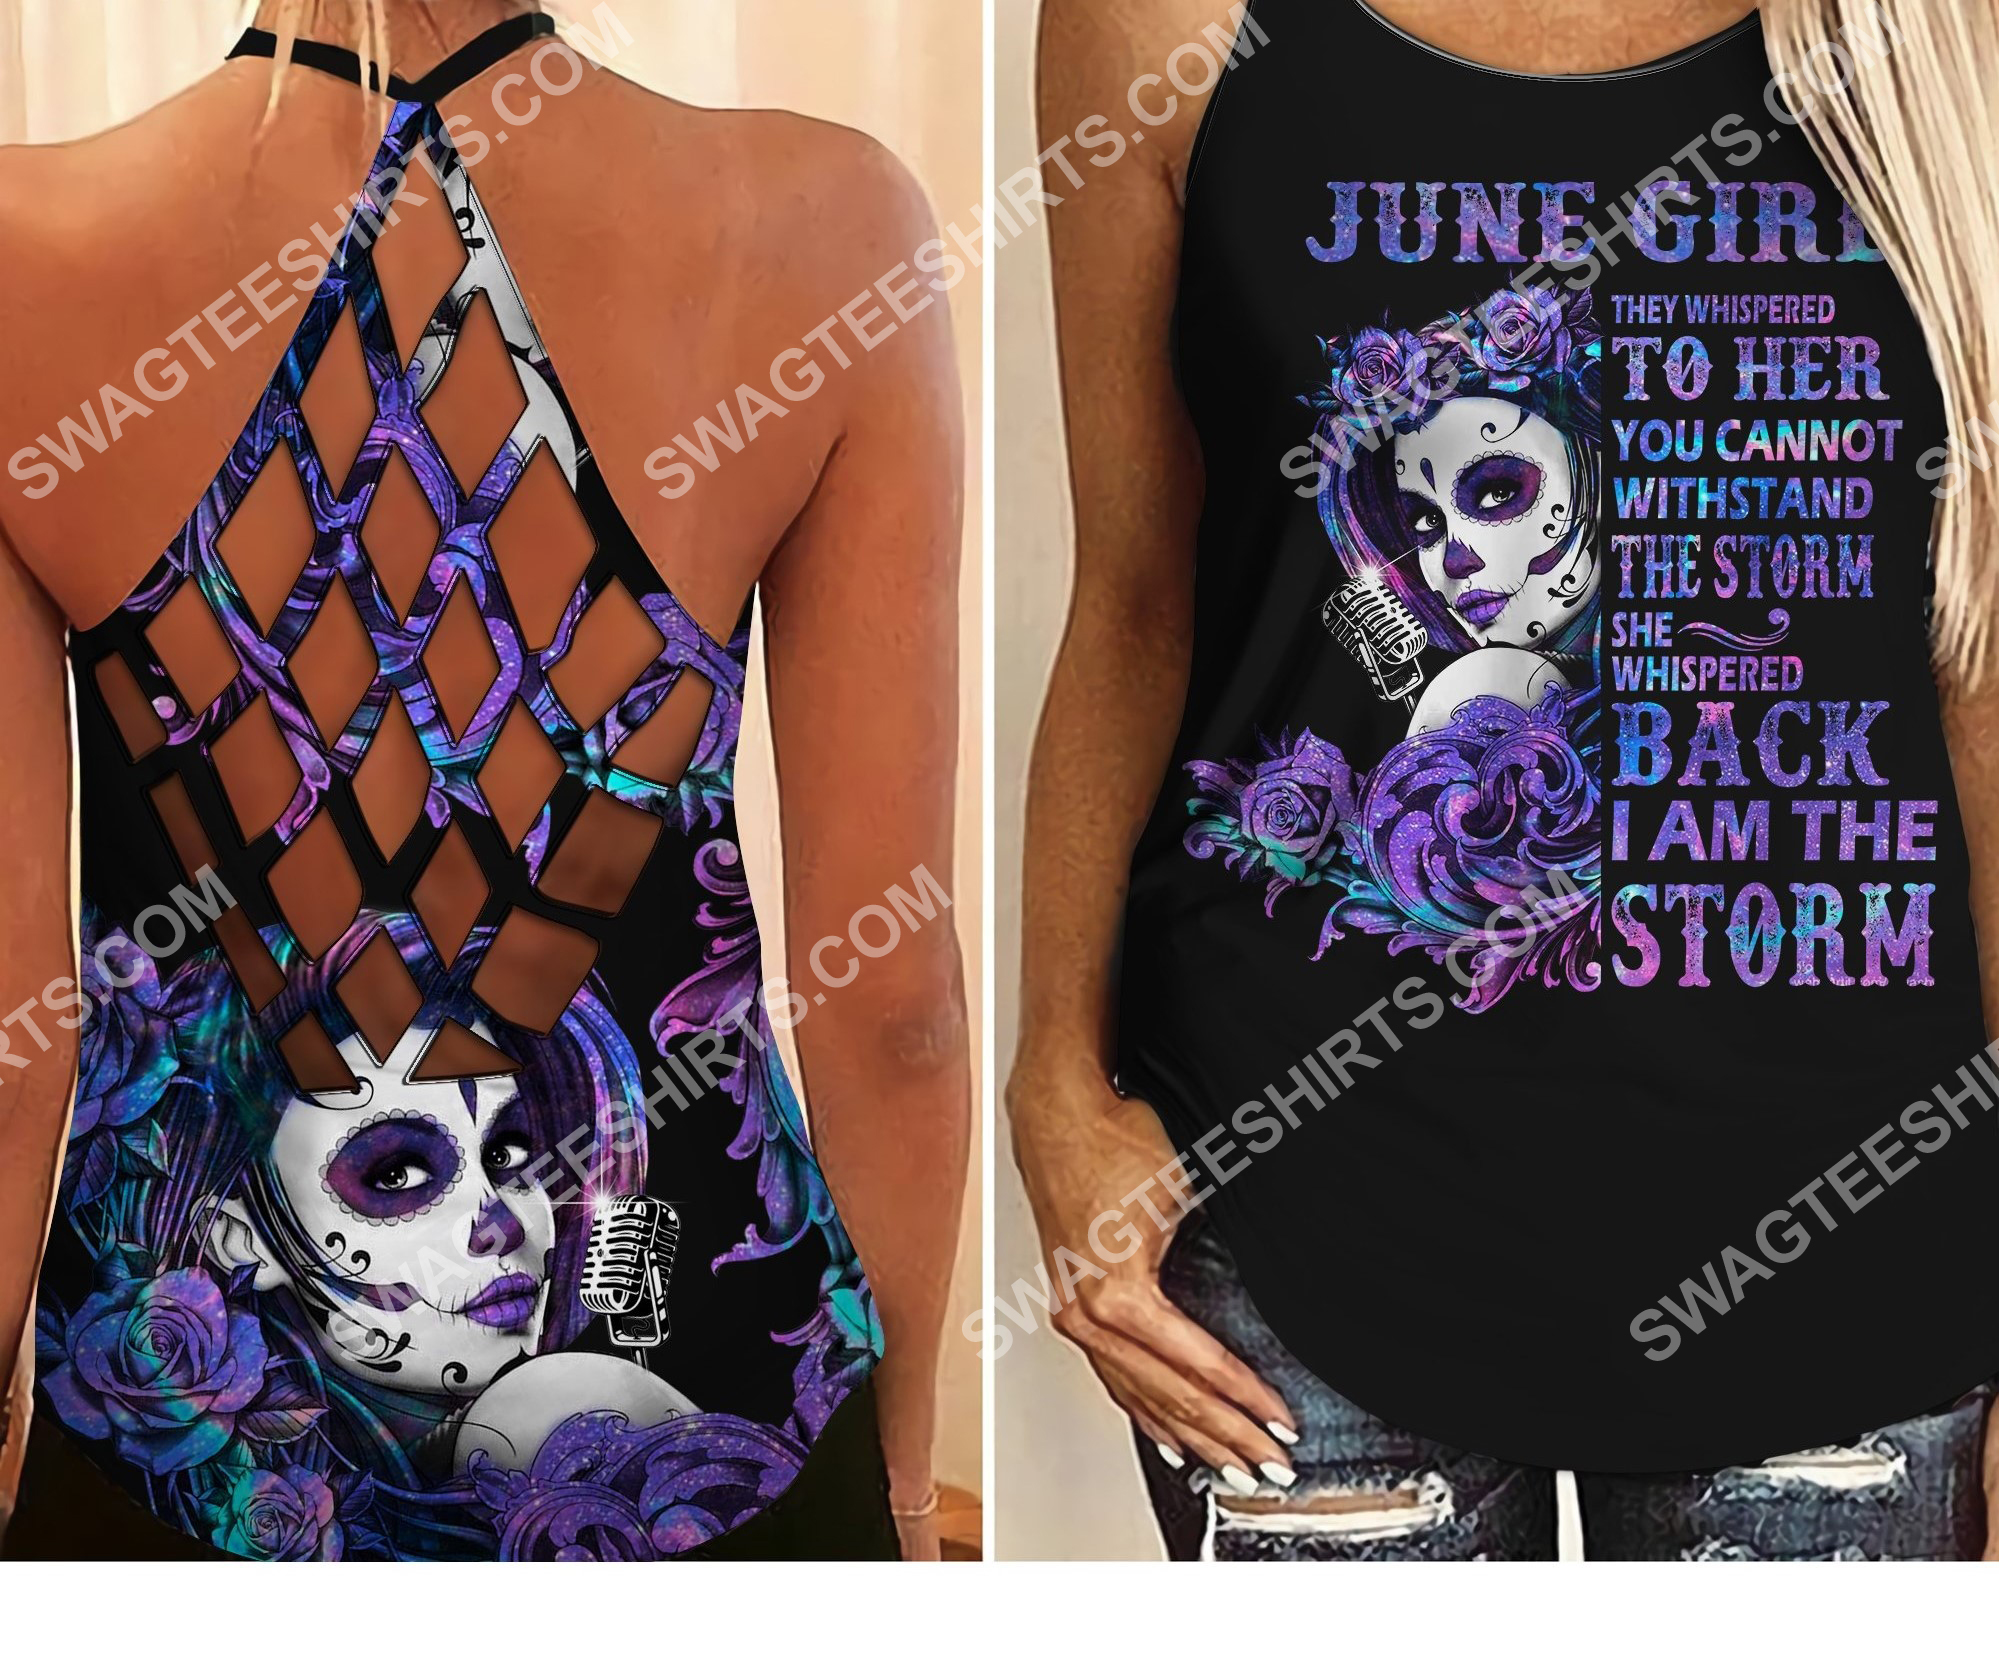 they whispered to her you cannot withstand the storm june girl criss-cross tank top 2 - Copy